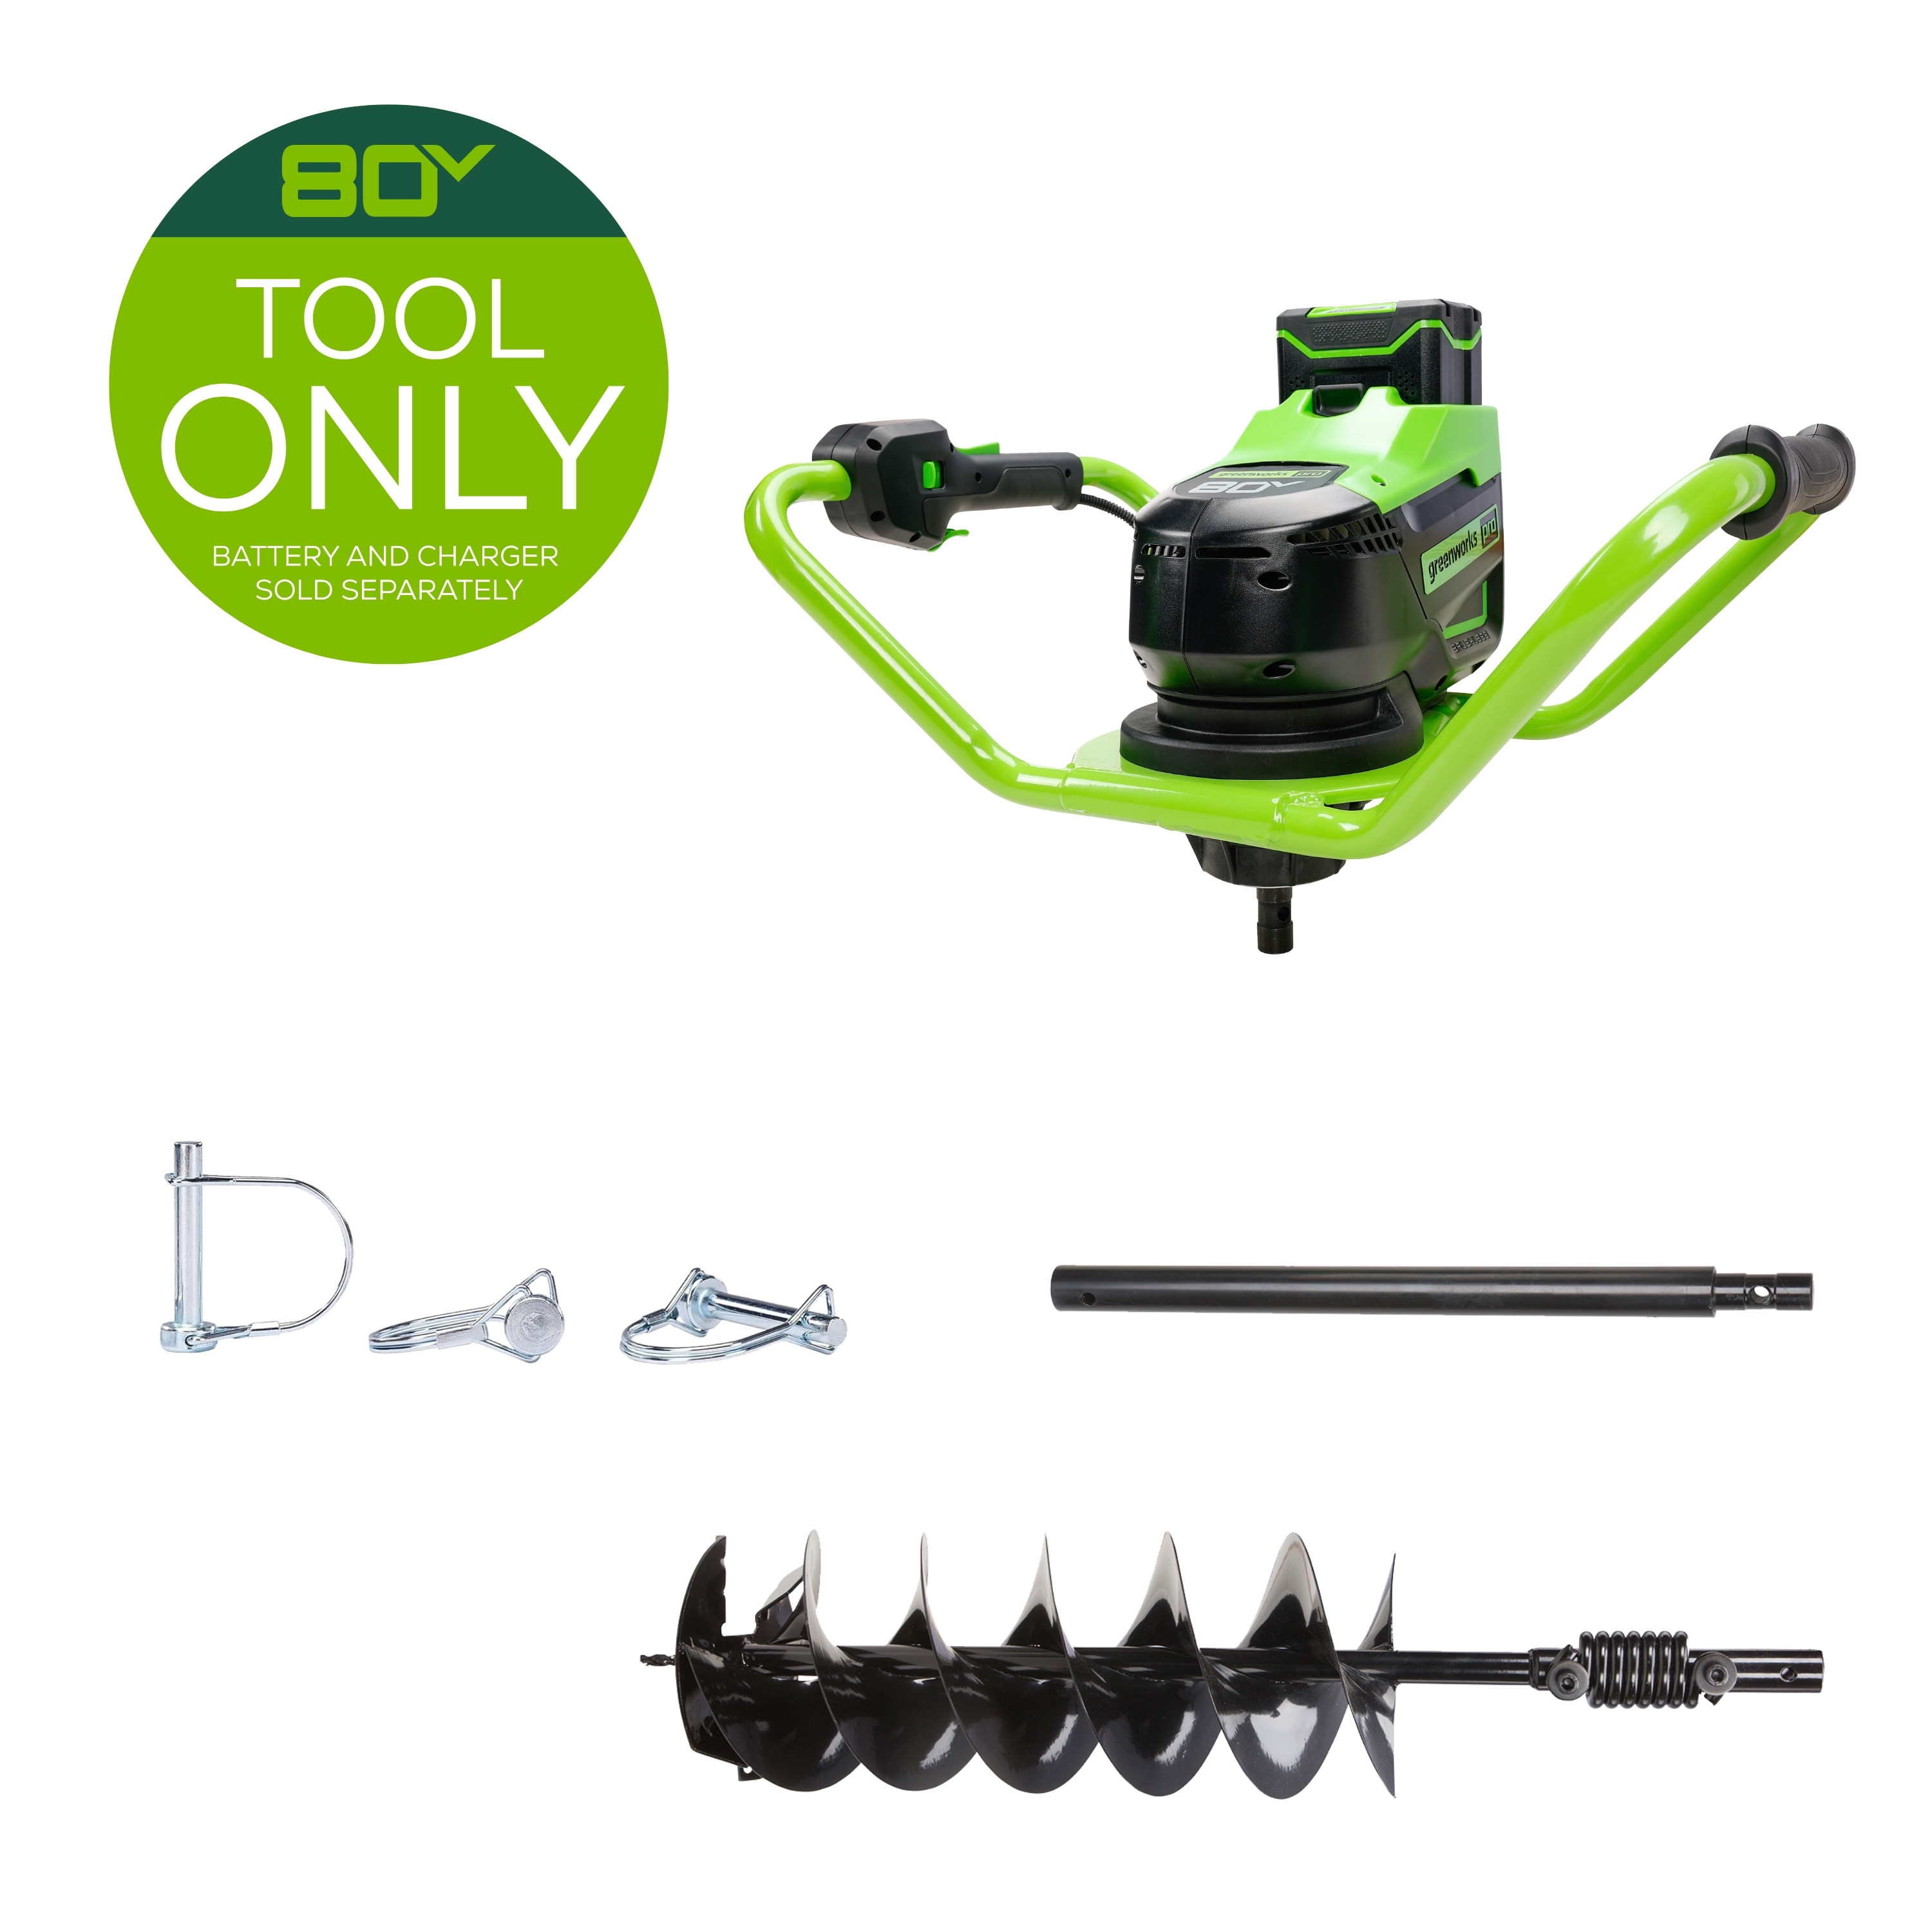 Greenworks 1-man Auger Powerhead with 8-in Bit(s) Included in the 